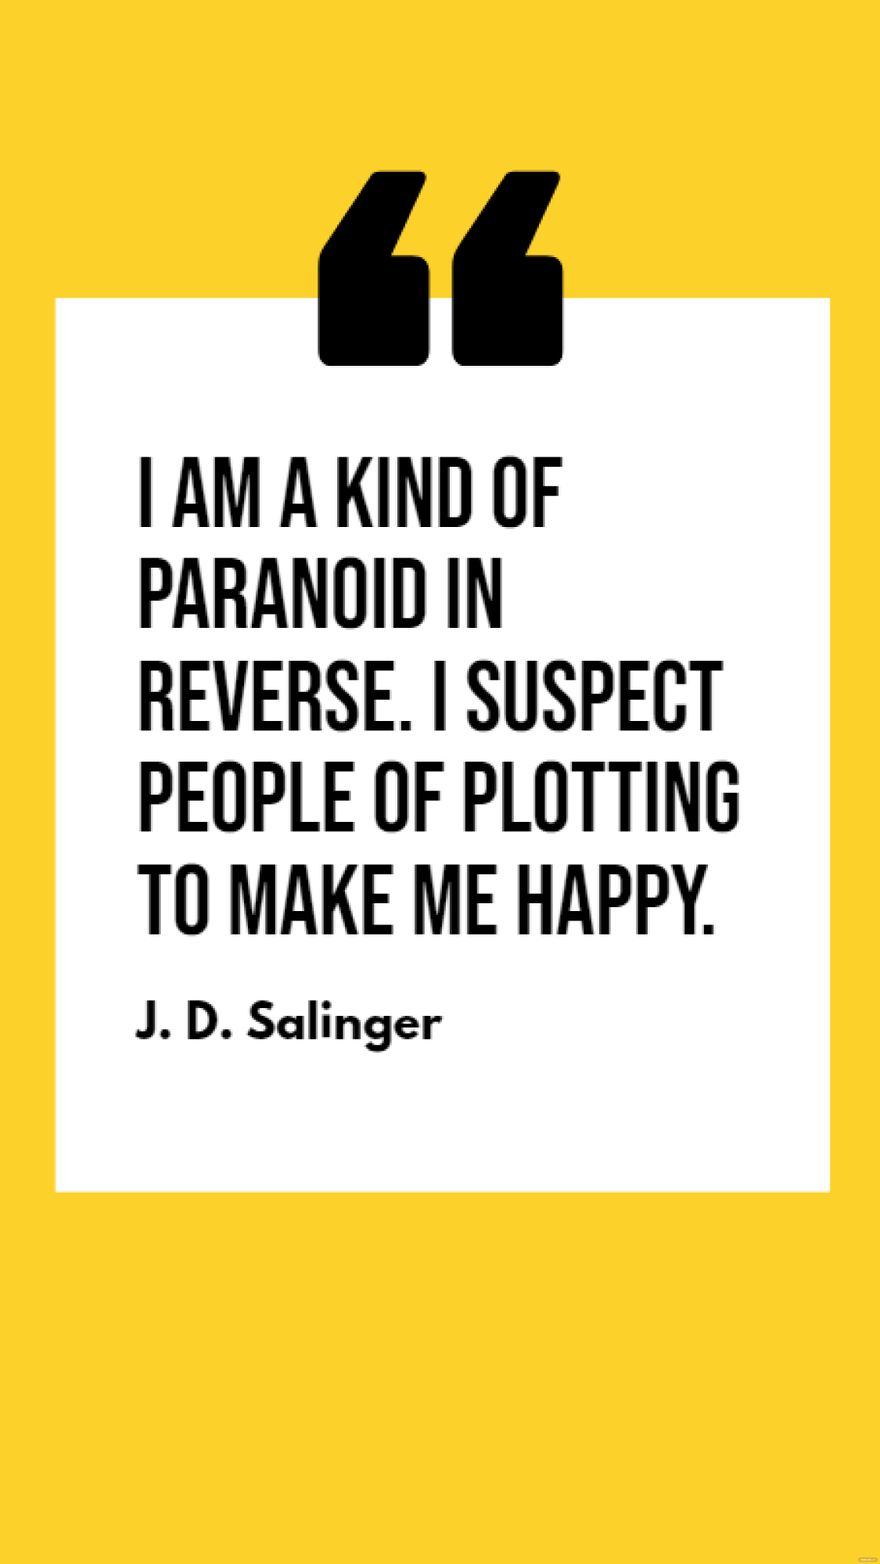 J. D. Salinger - I am a kind of paranoid in reverse. I suspect people of plotting to make me happy. in JPG